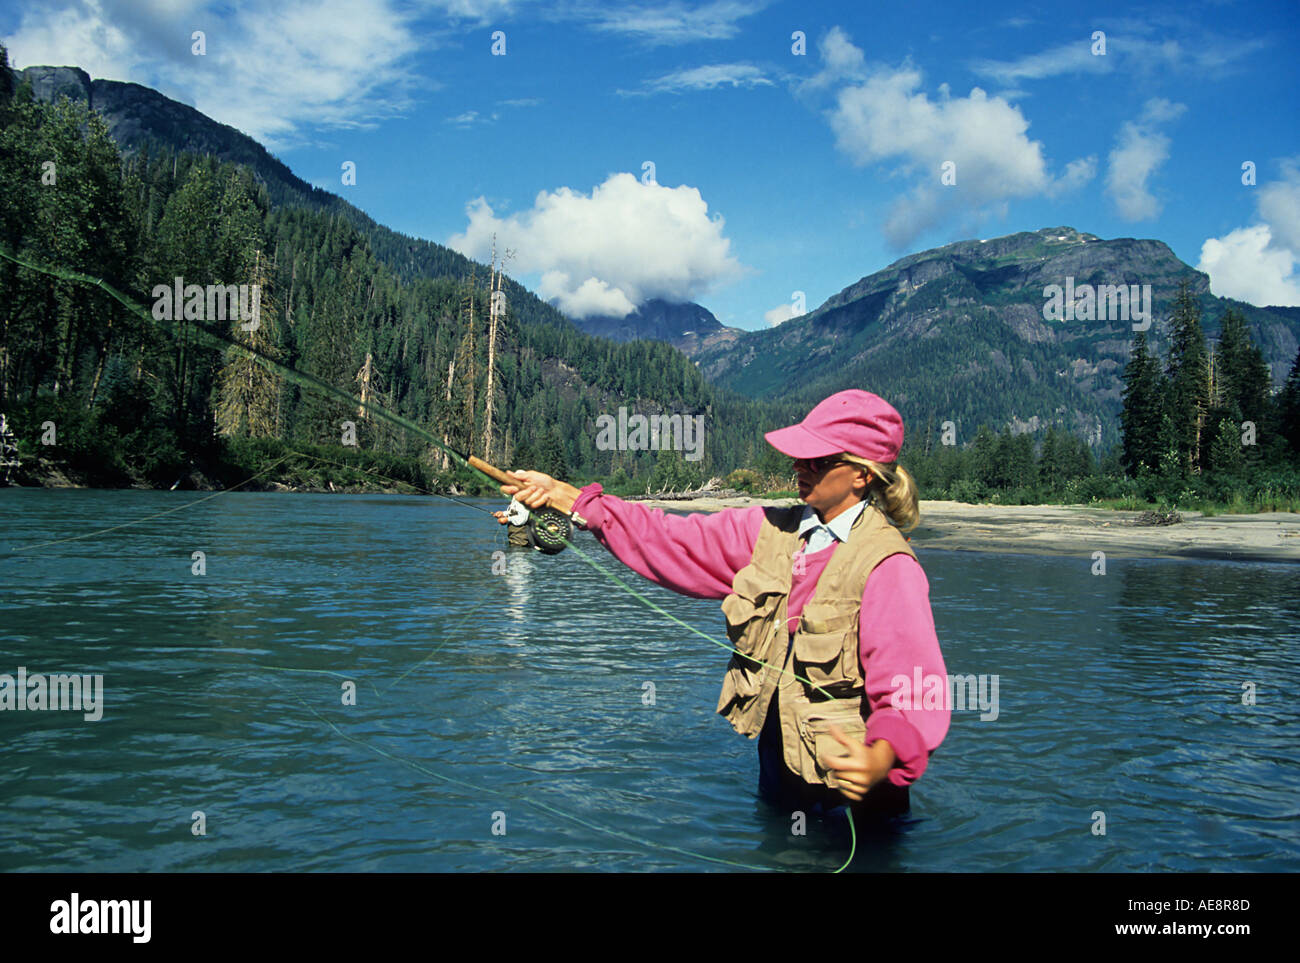 Lady flycaster fishing for salmon Giltoyees river Douglas Channel British Columbia Stock Photo